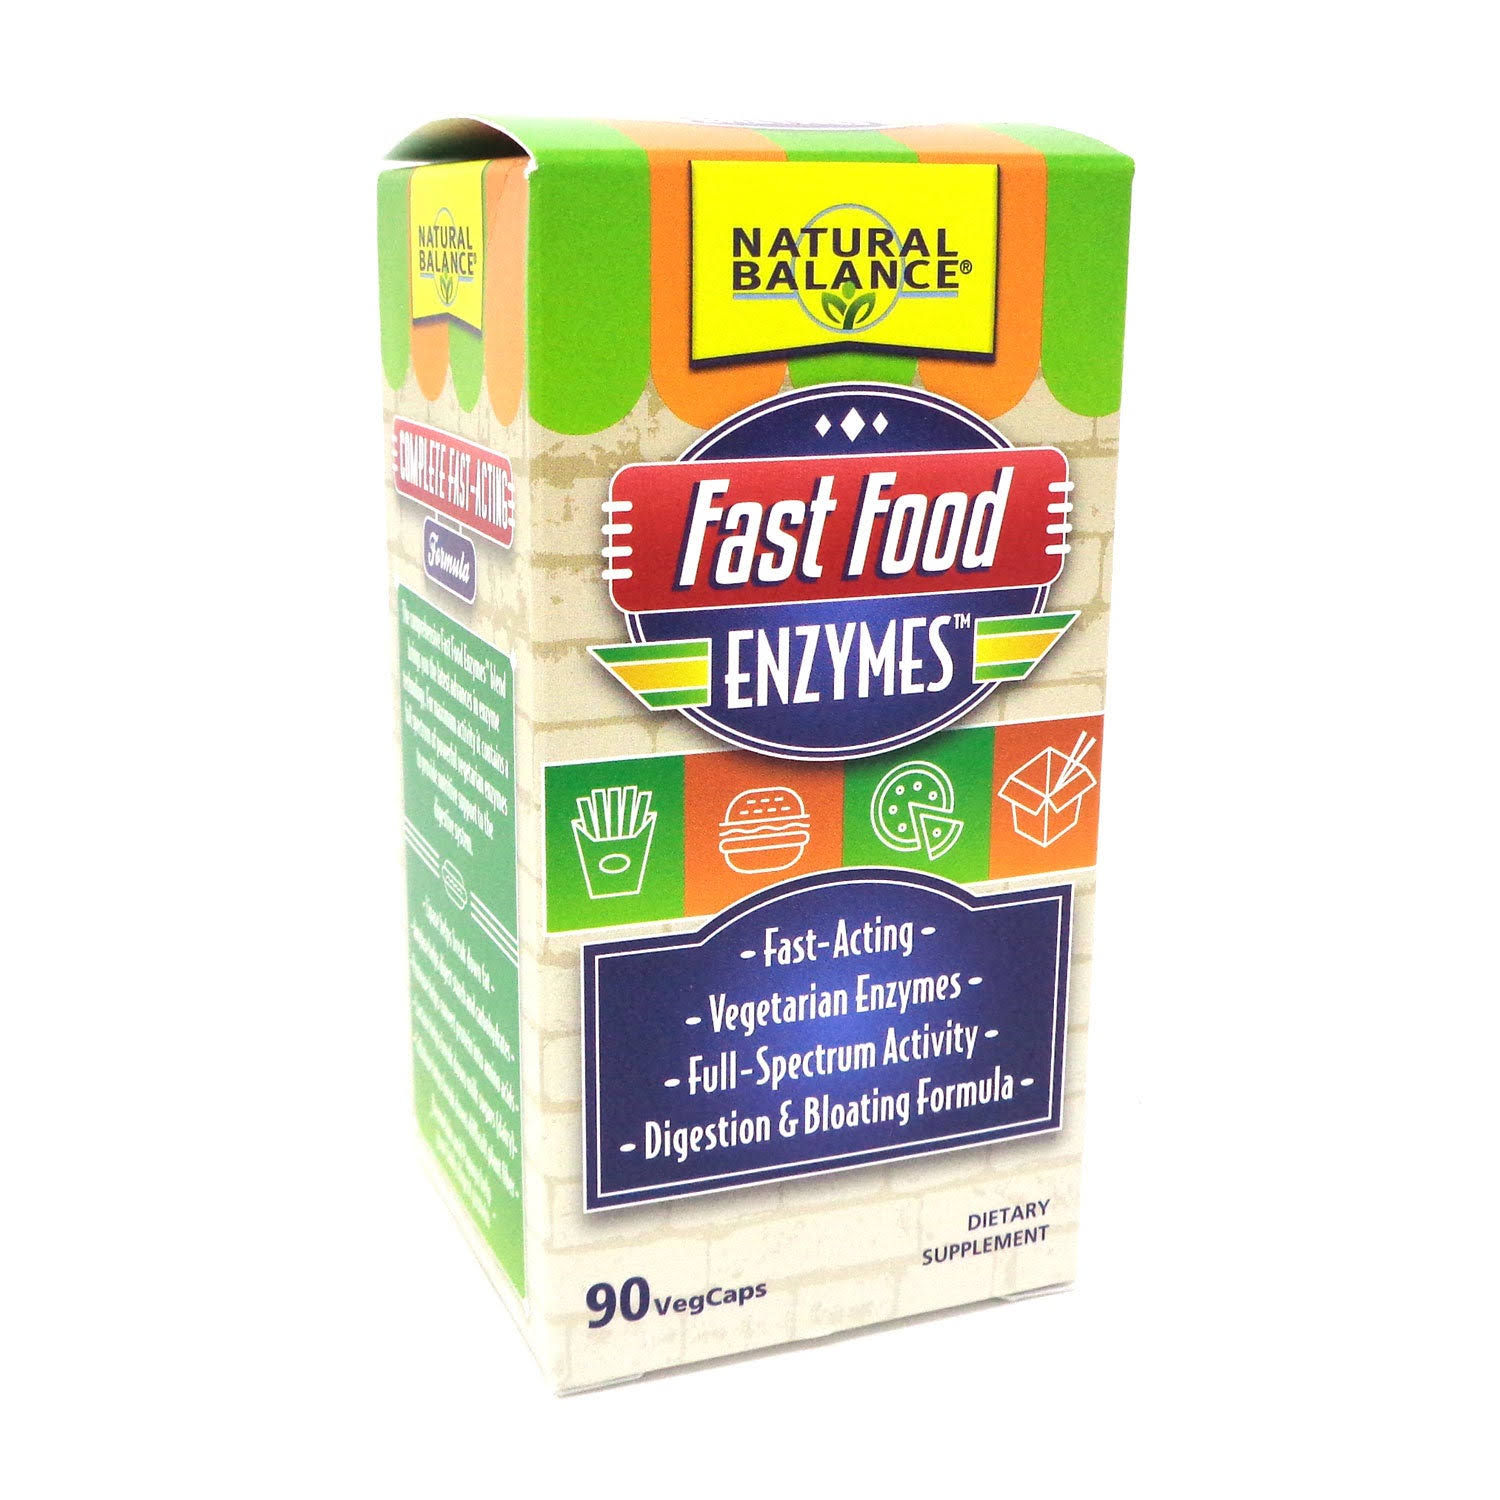 Natural Balance Fast Food Enzymes Veggie Caps - 90ct